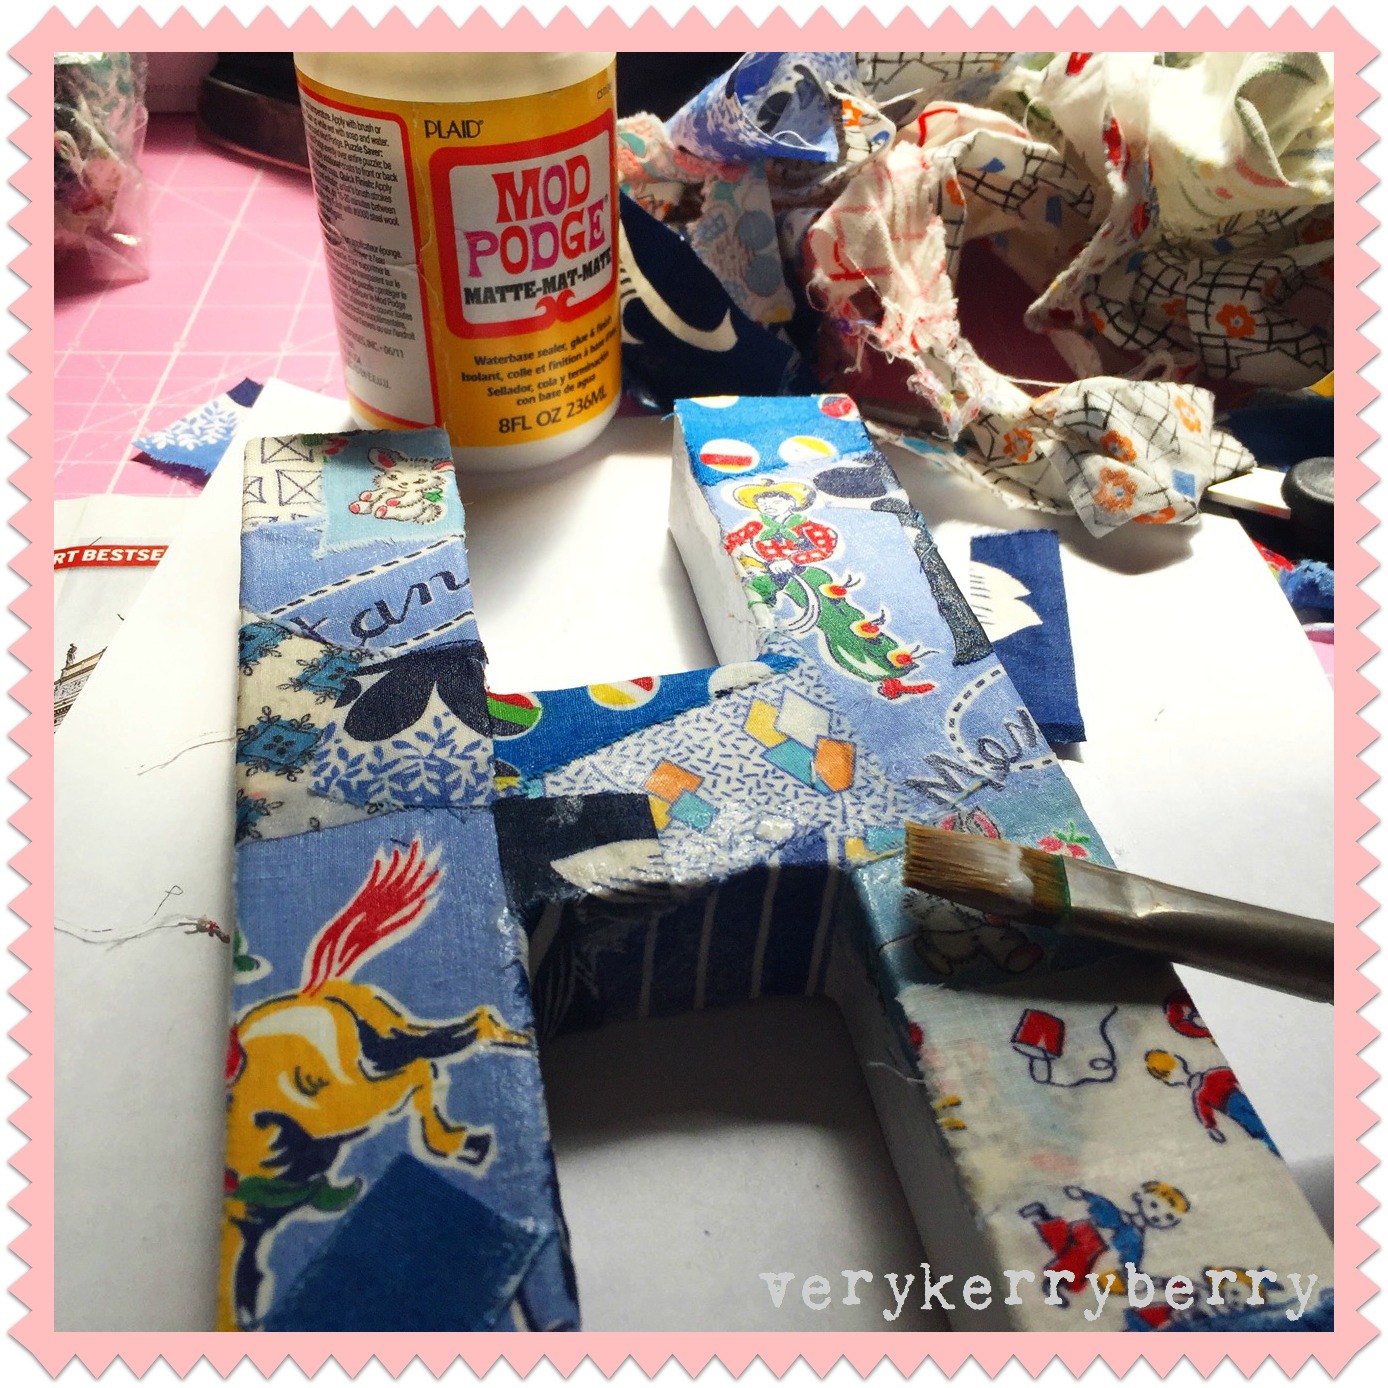 Mairascraft - Fabric Mod Podge is really tough, very durable AND